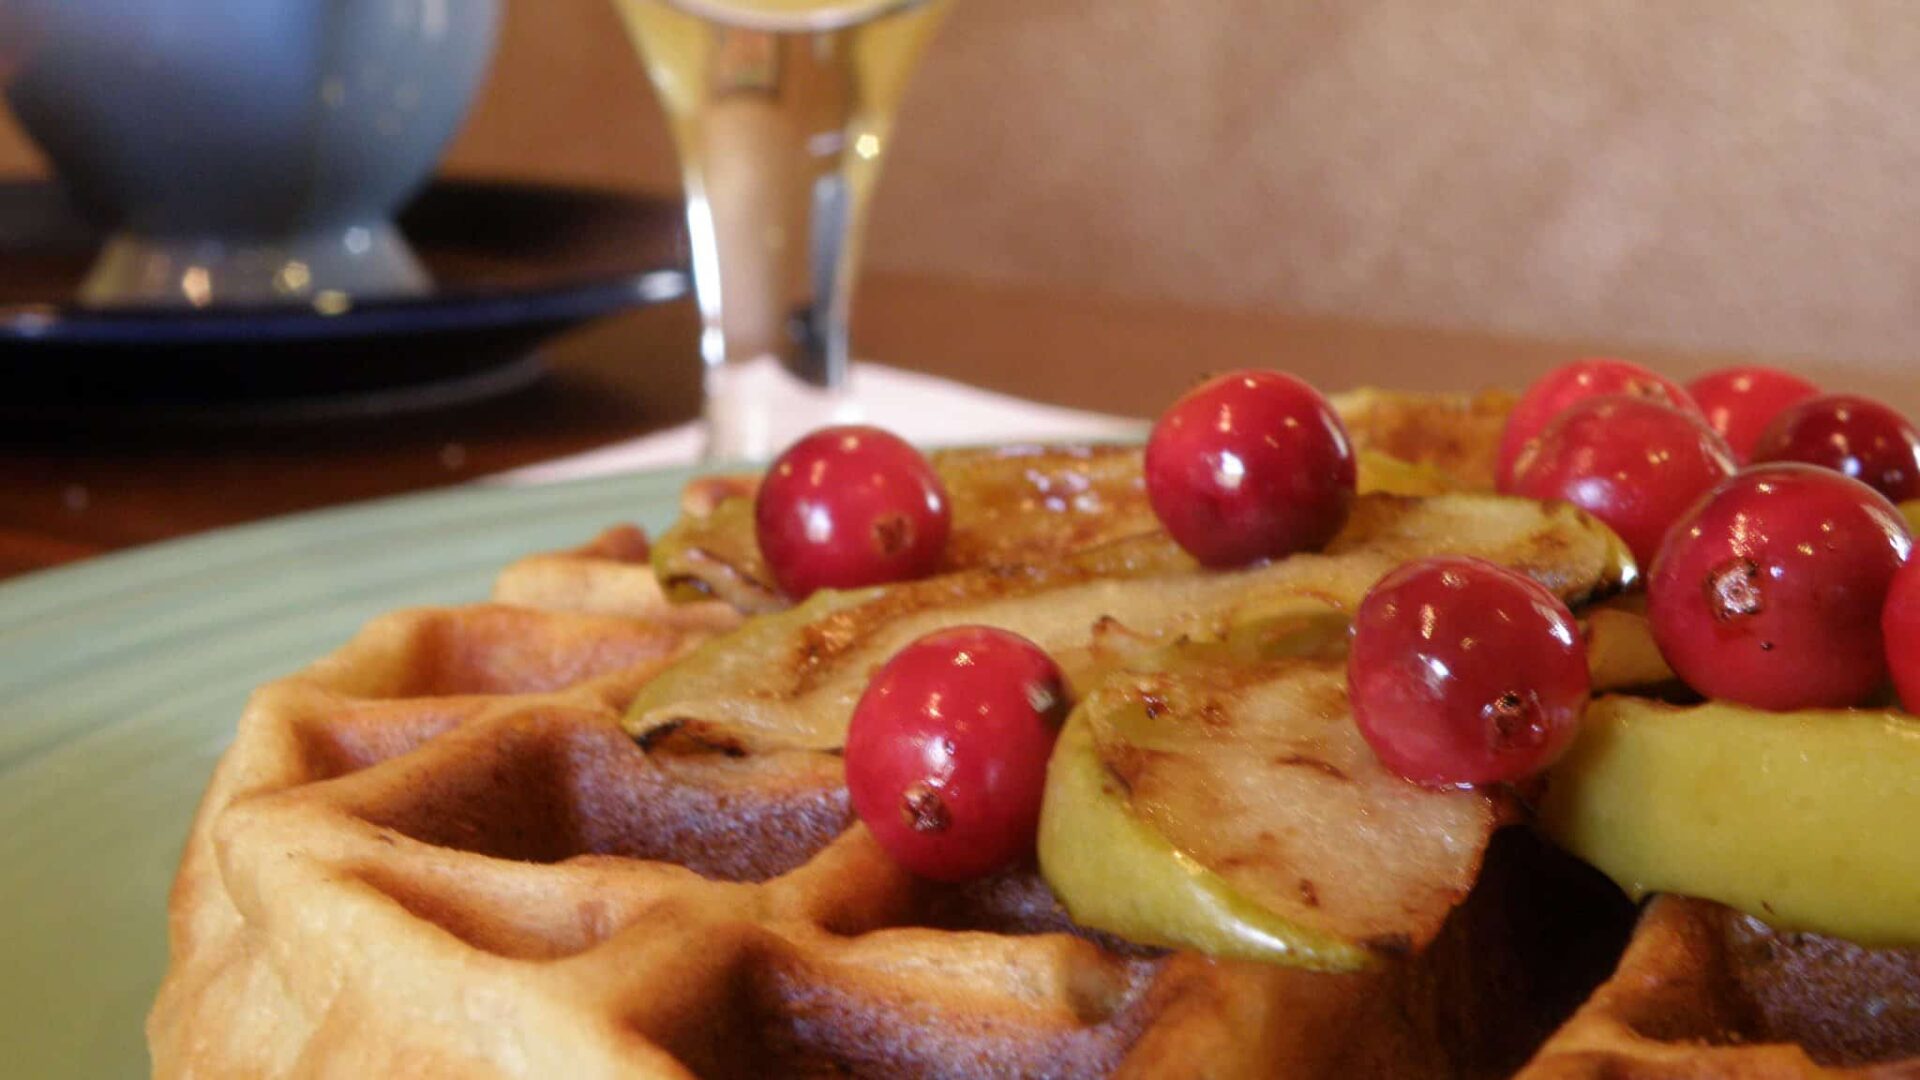 Warm hazelnut waffle with apples and currants and a glass of orange juice